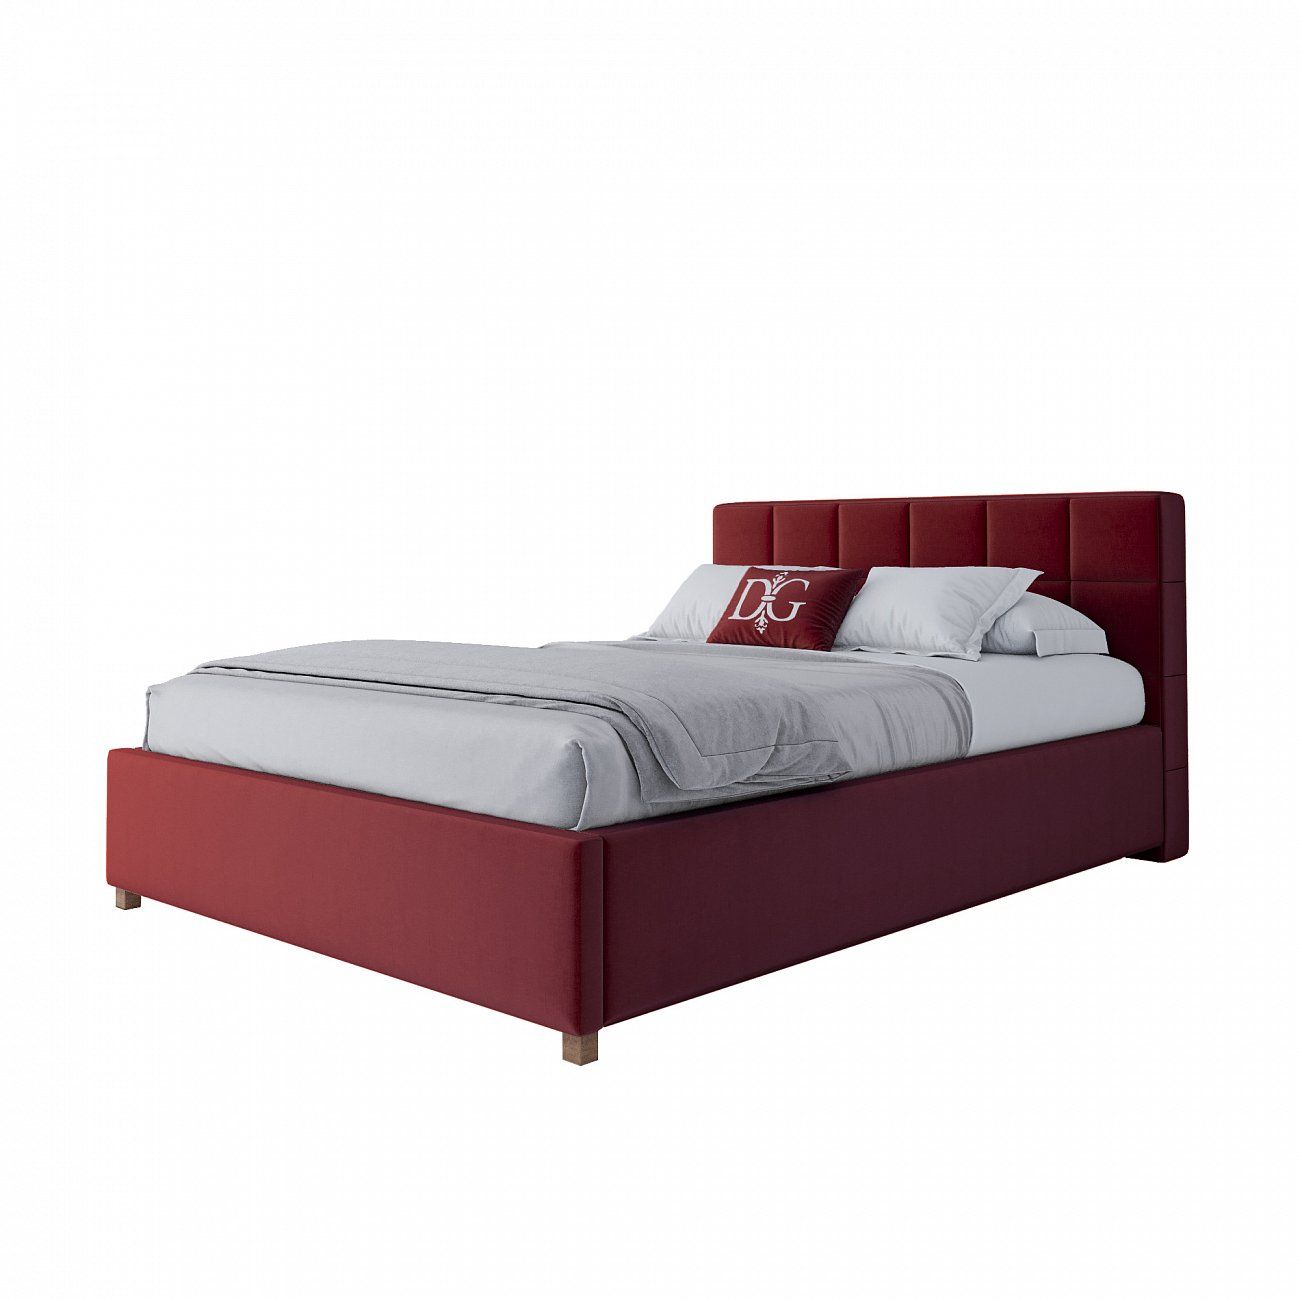 Teenage bed with upholstered headboard 140x200 cm red Wales